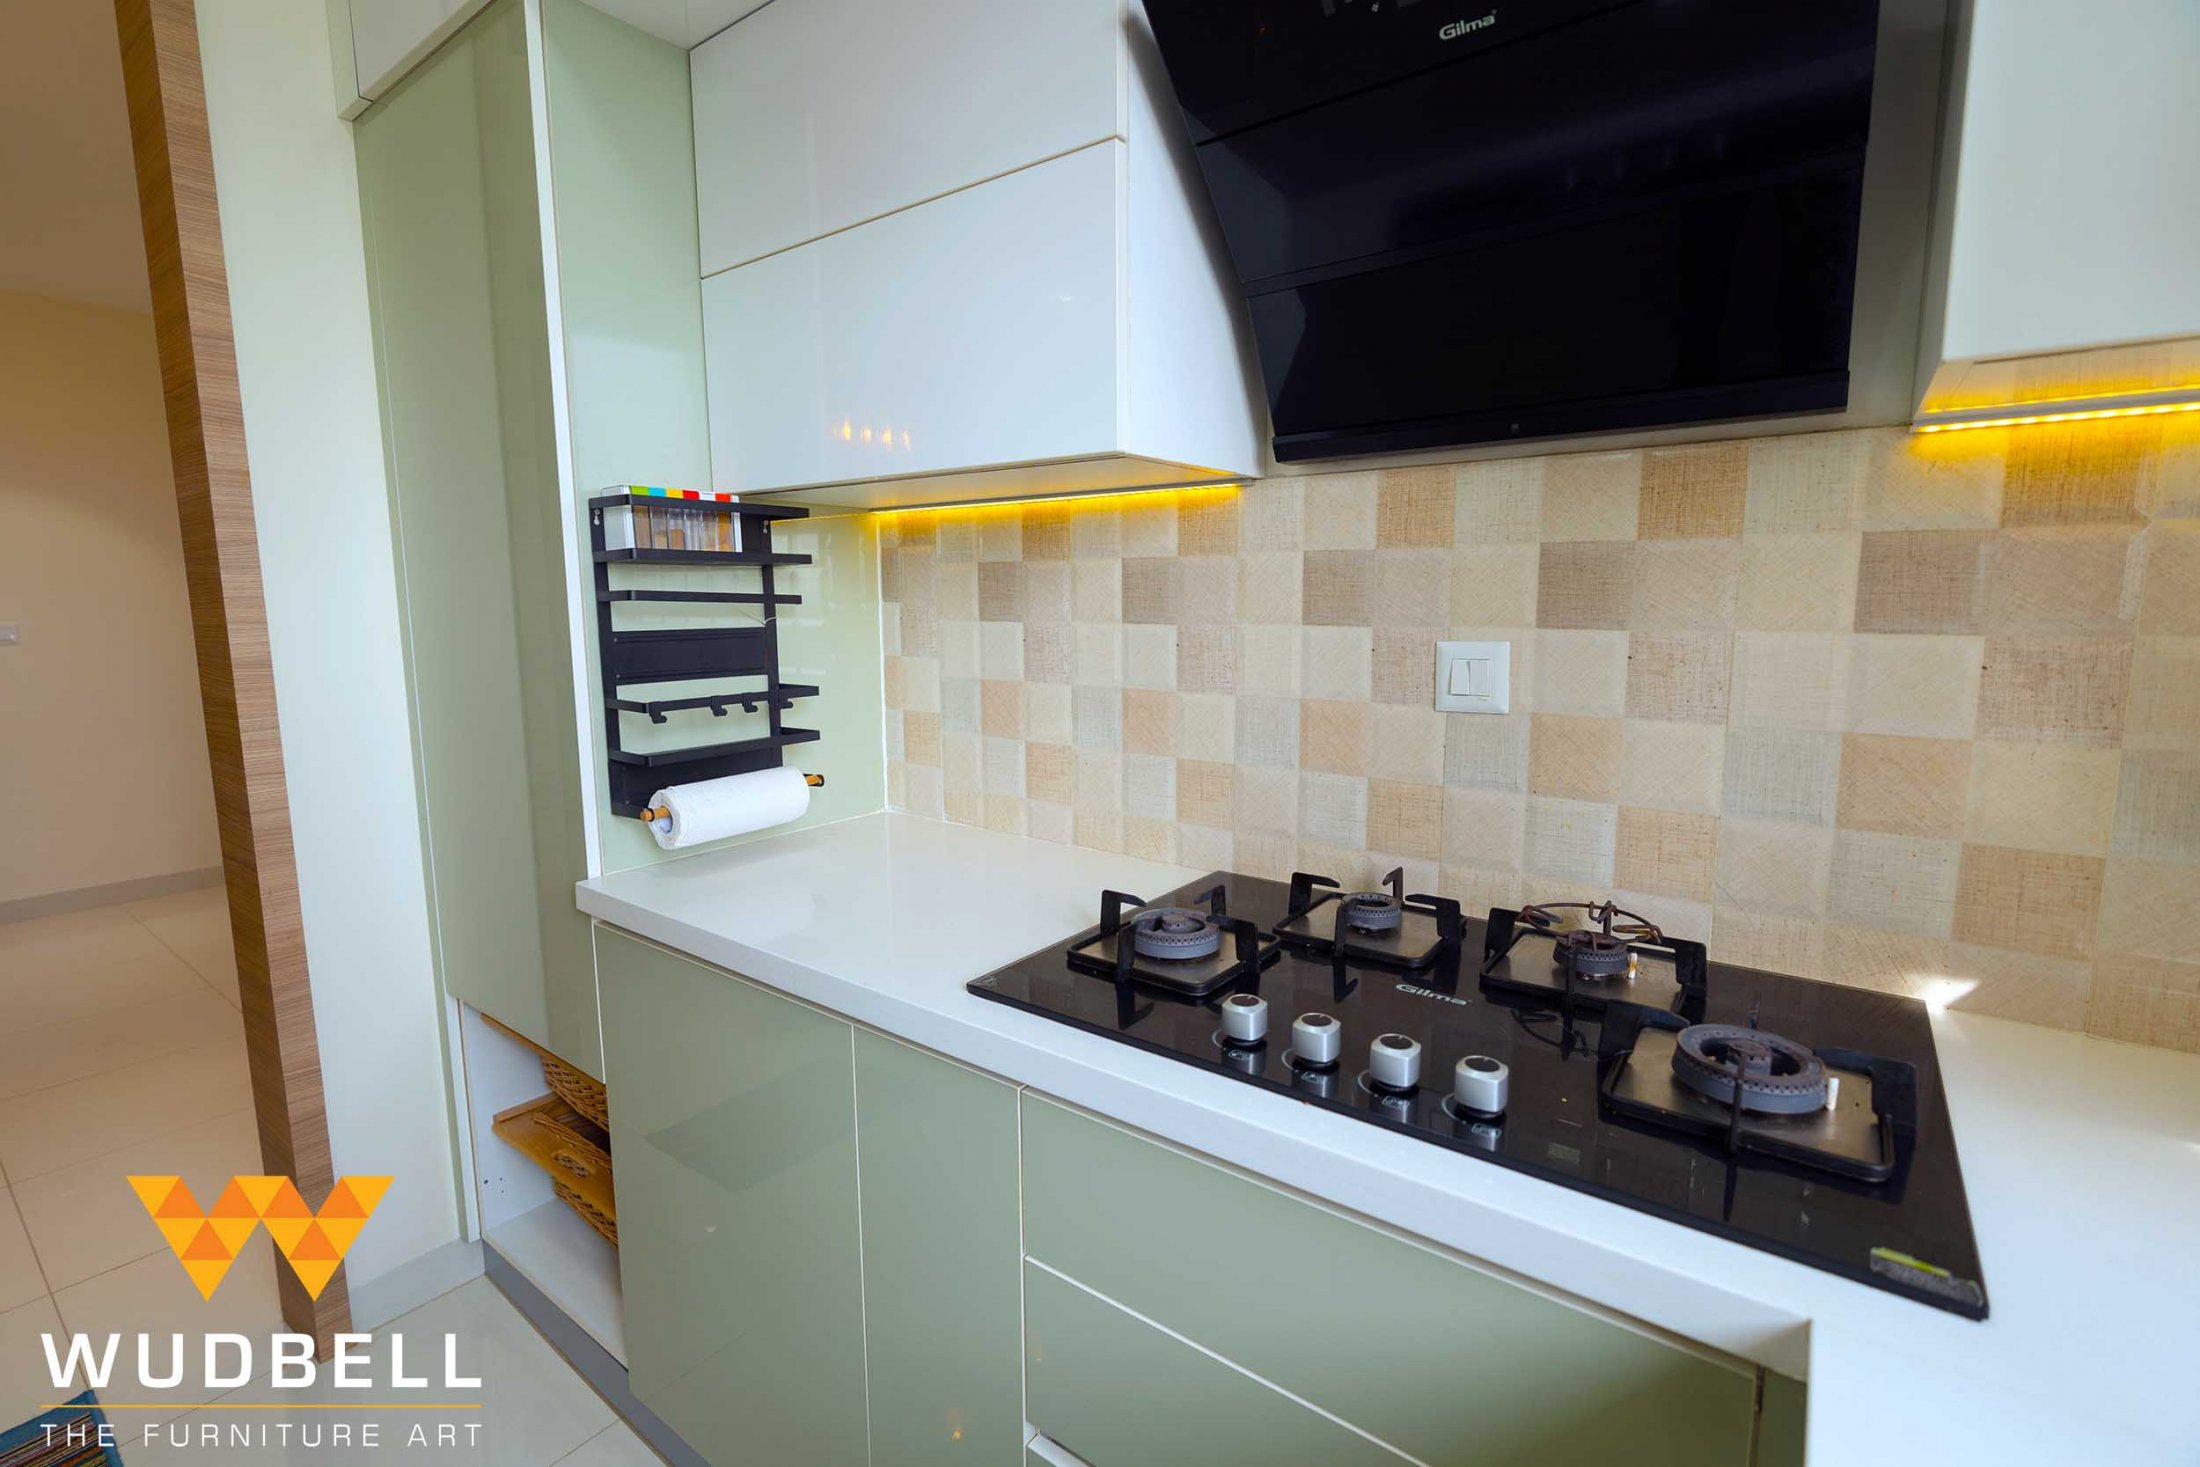 LED downlights compliment the modular kitchen